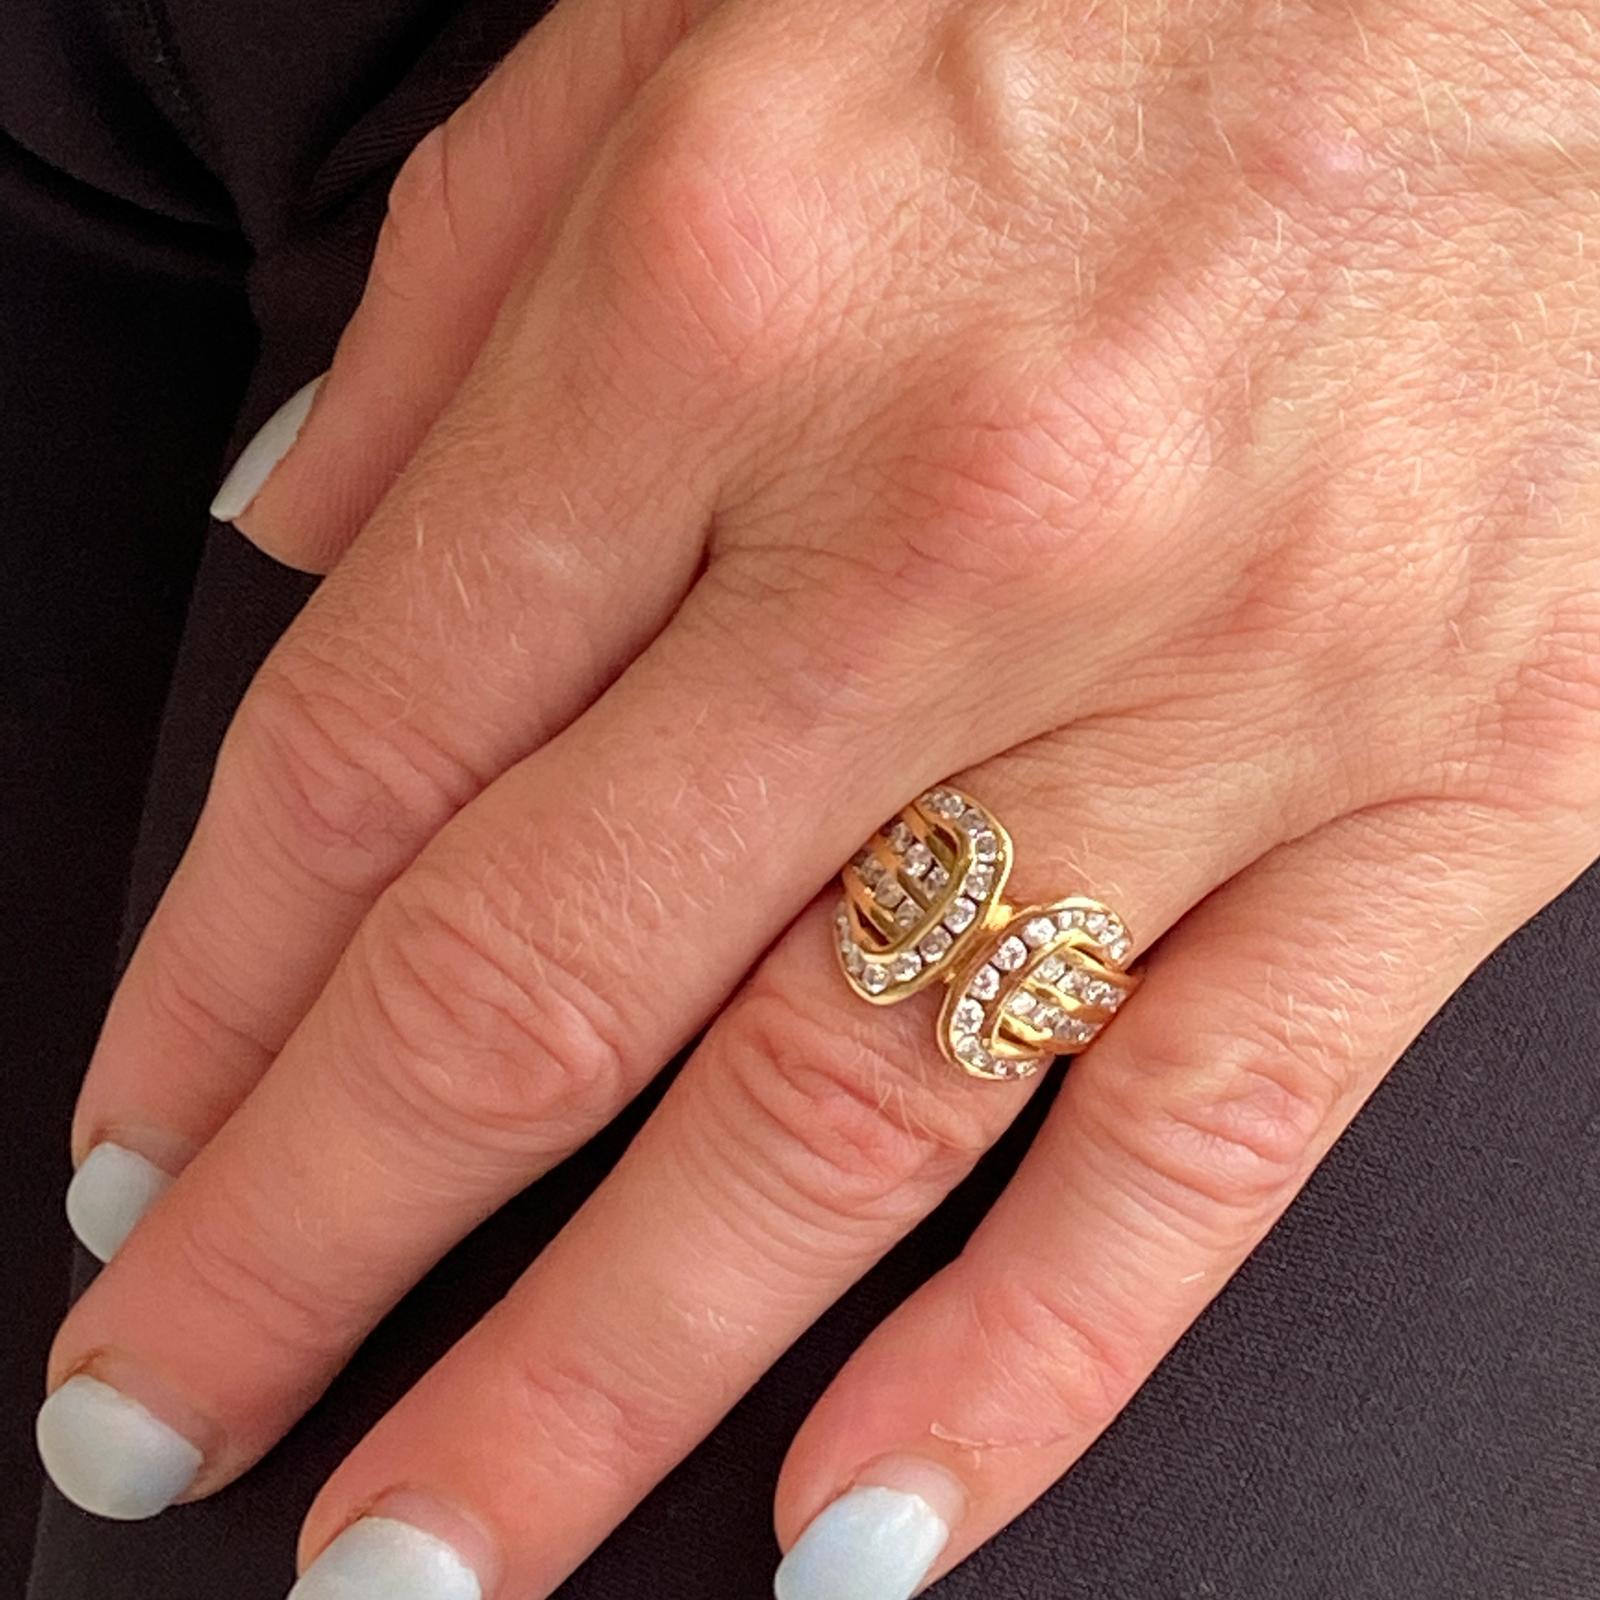 1970's diamond buckle ring fashioned in 14 karat yellow gold. The ring features 40 channel set round brilliant cut diamonds weighing approximately 1.00 carat total weight and graded H-I color and SI clarity. The ring is currently size 5.5 (can be